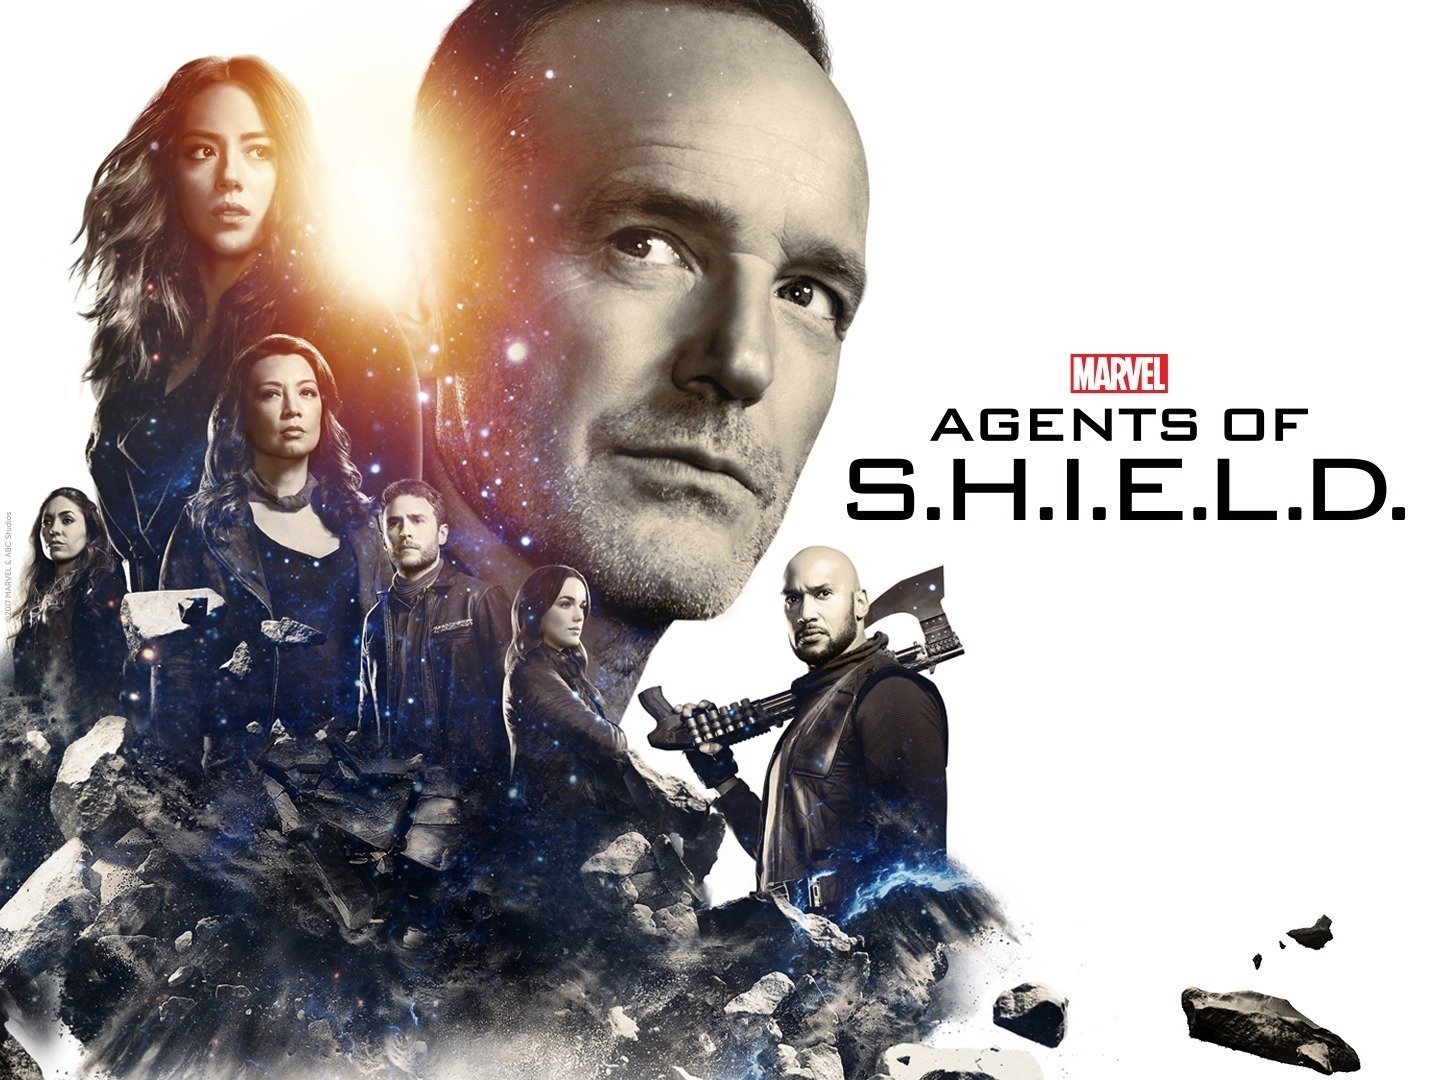 Marvel’s Agents Of S.H.I.E.L.D.